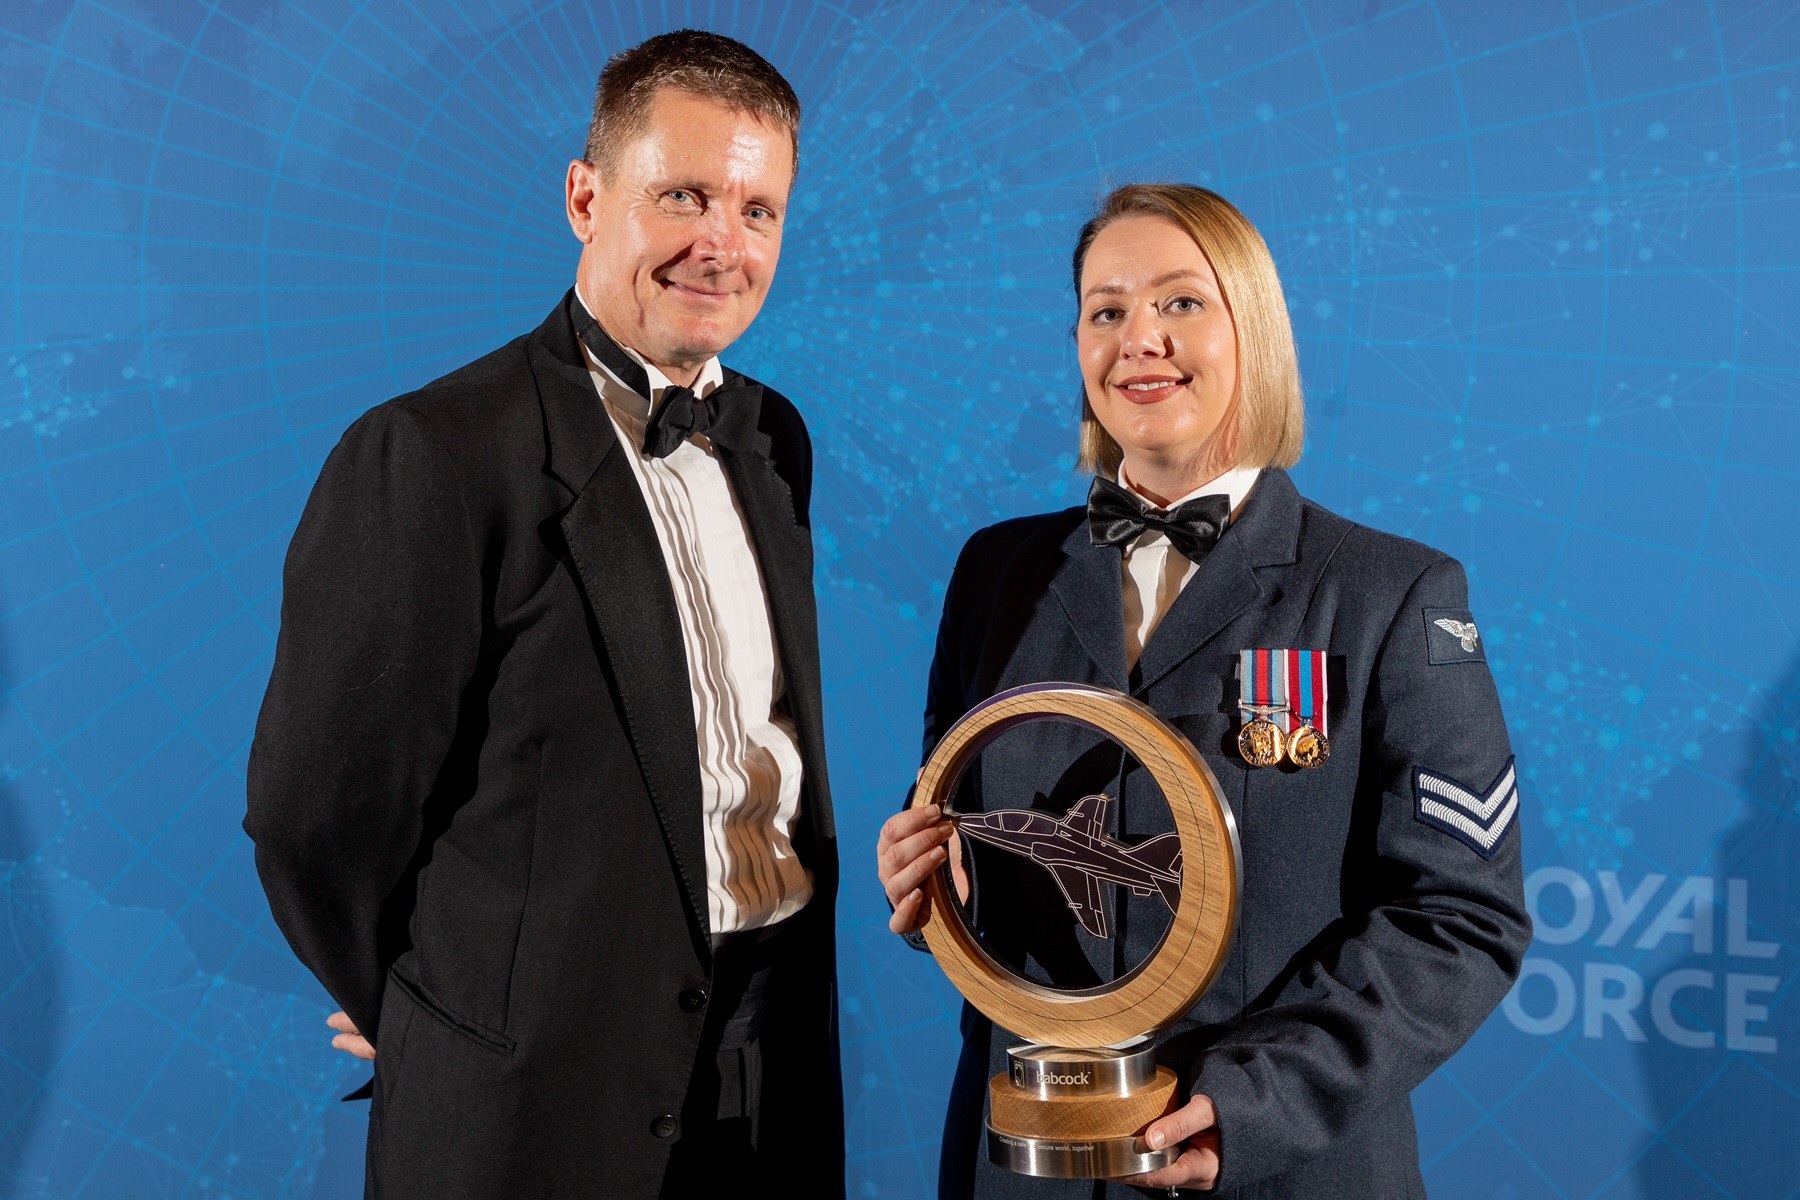 Image shows RAF personnel with circular award.